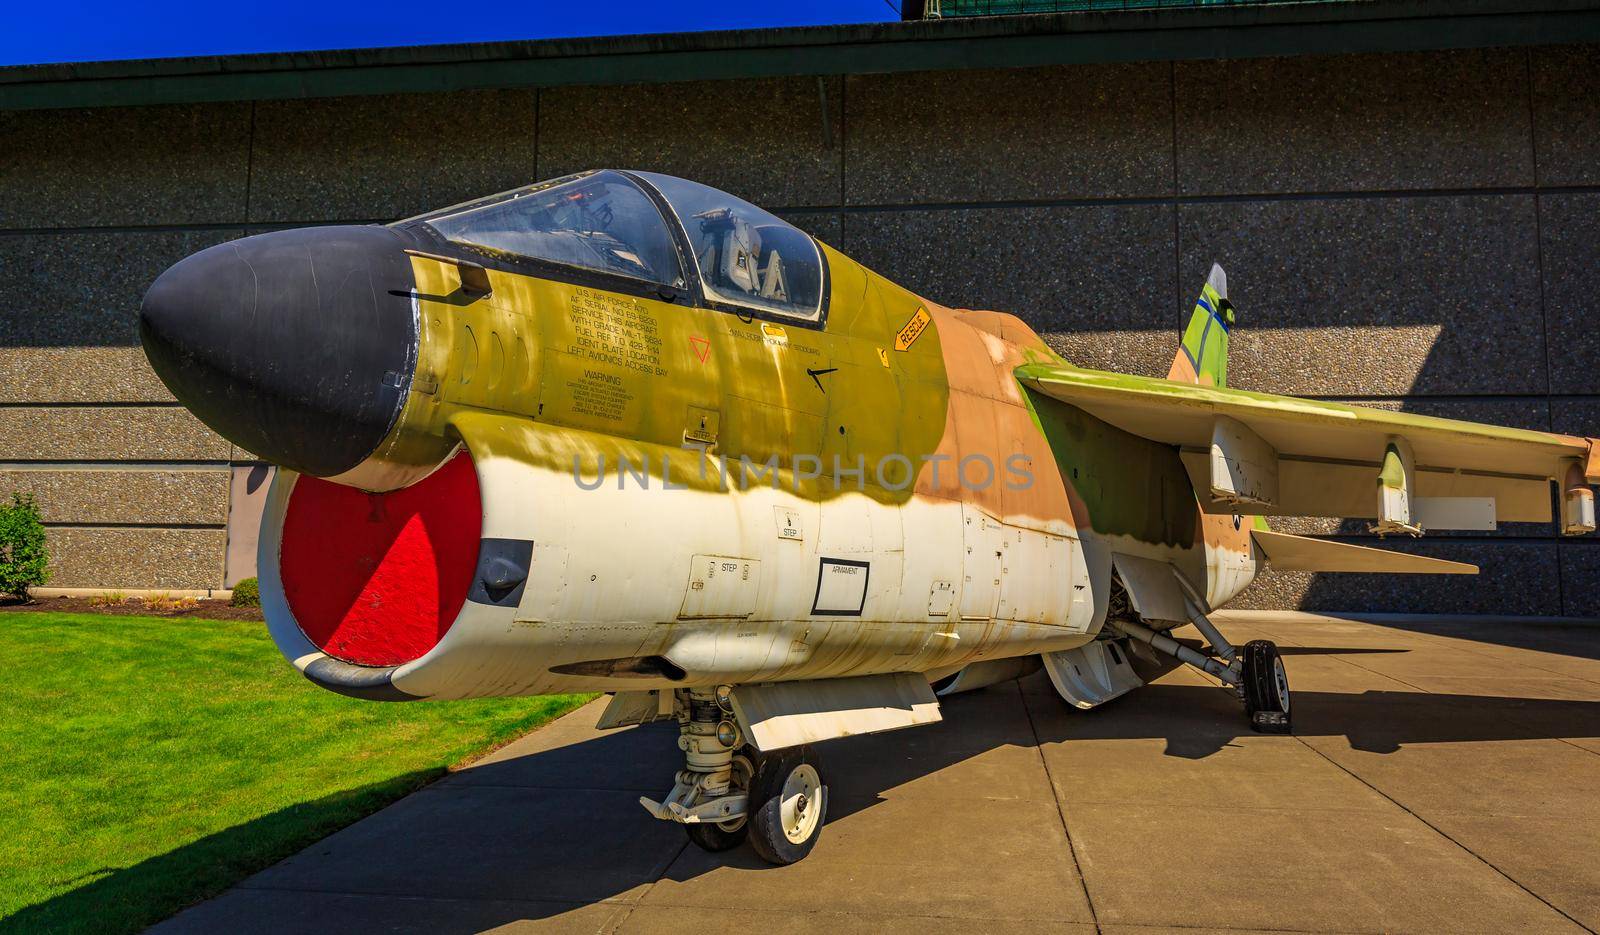 McMinnville, Oregon - August 21, 2017: US Air Force LTV A-7D Corsair II on exhibition at Evergreen Aviation & Space Museum.